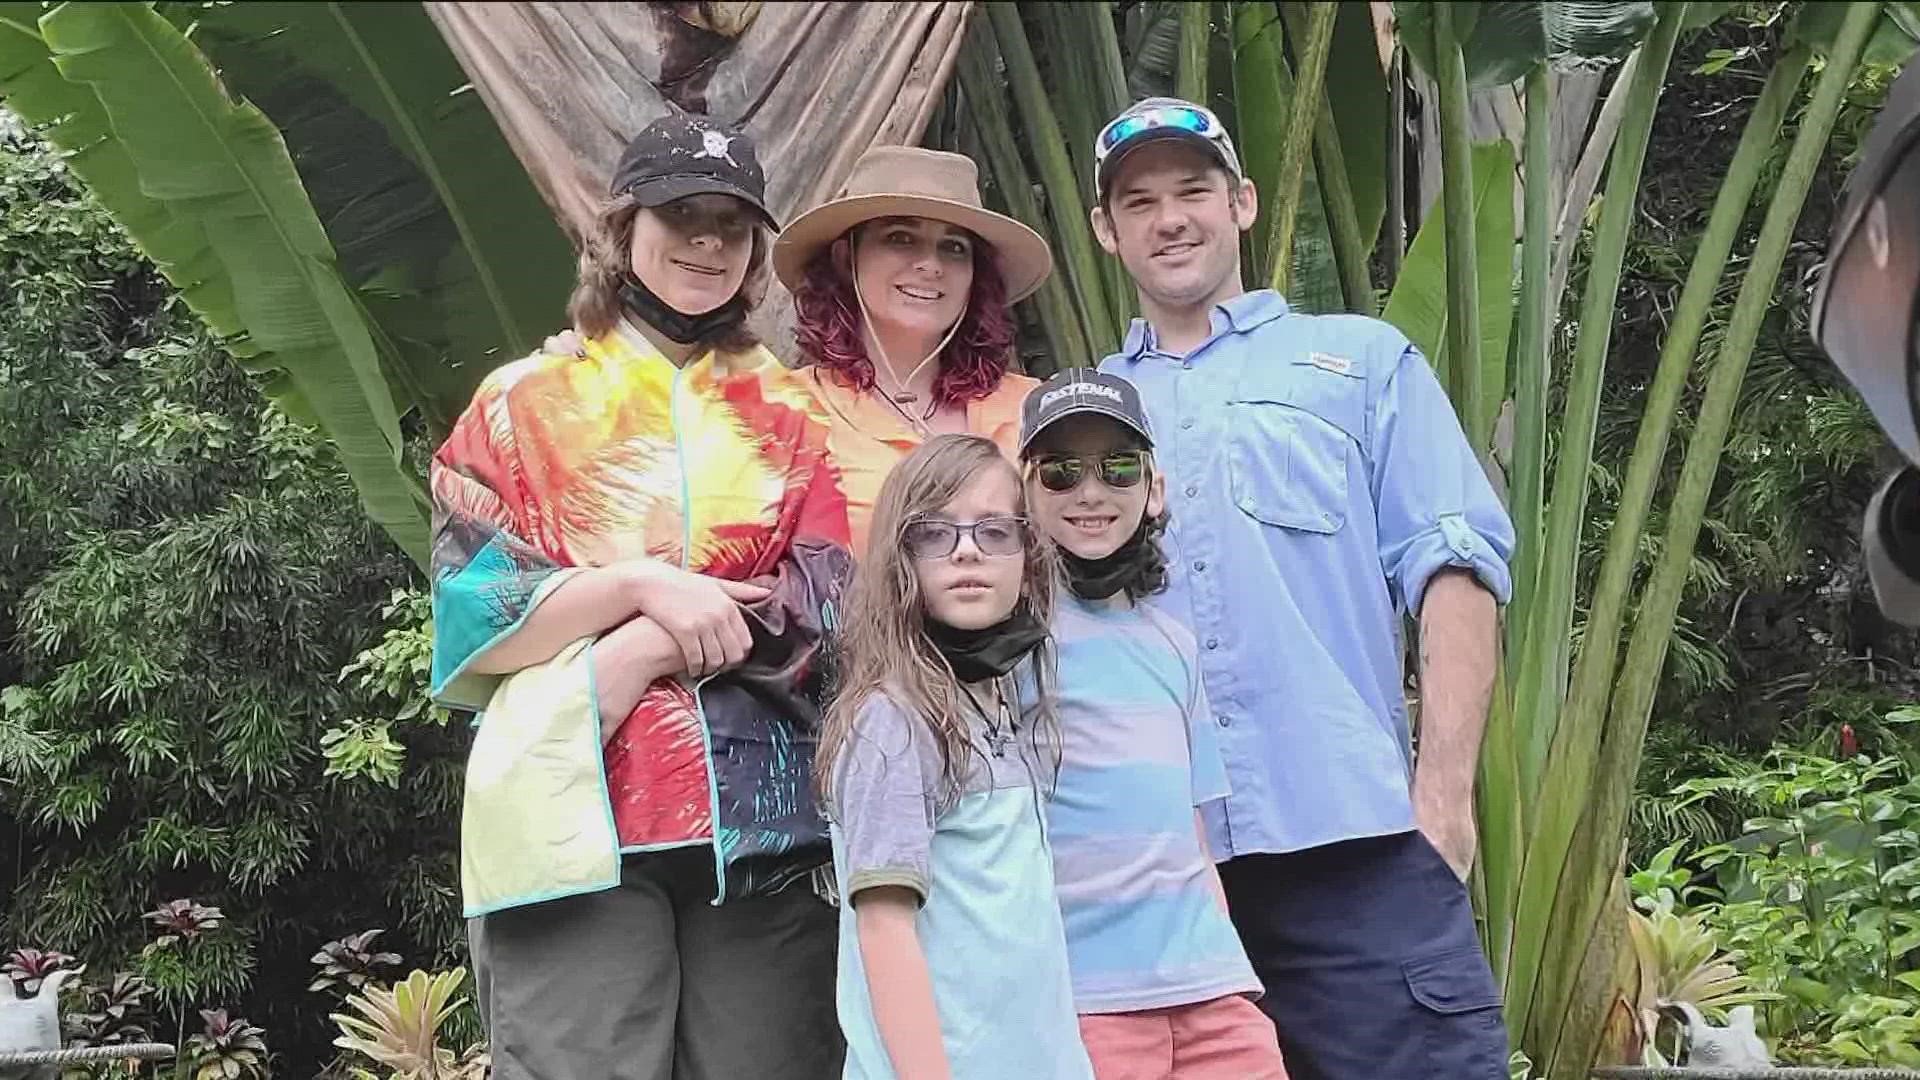 Sarah Wheeler discovered she had a progressive neurodegenerative disease on Mother's Day 2021. The 35-year-old retired to travel and spend time with family.